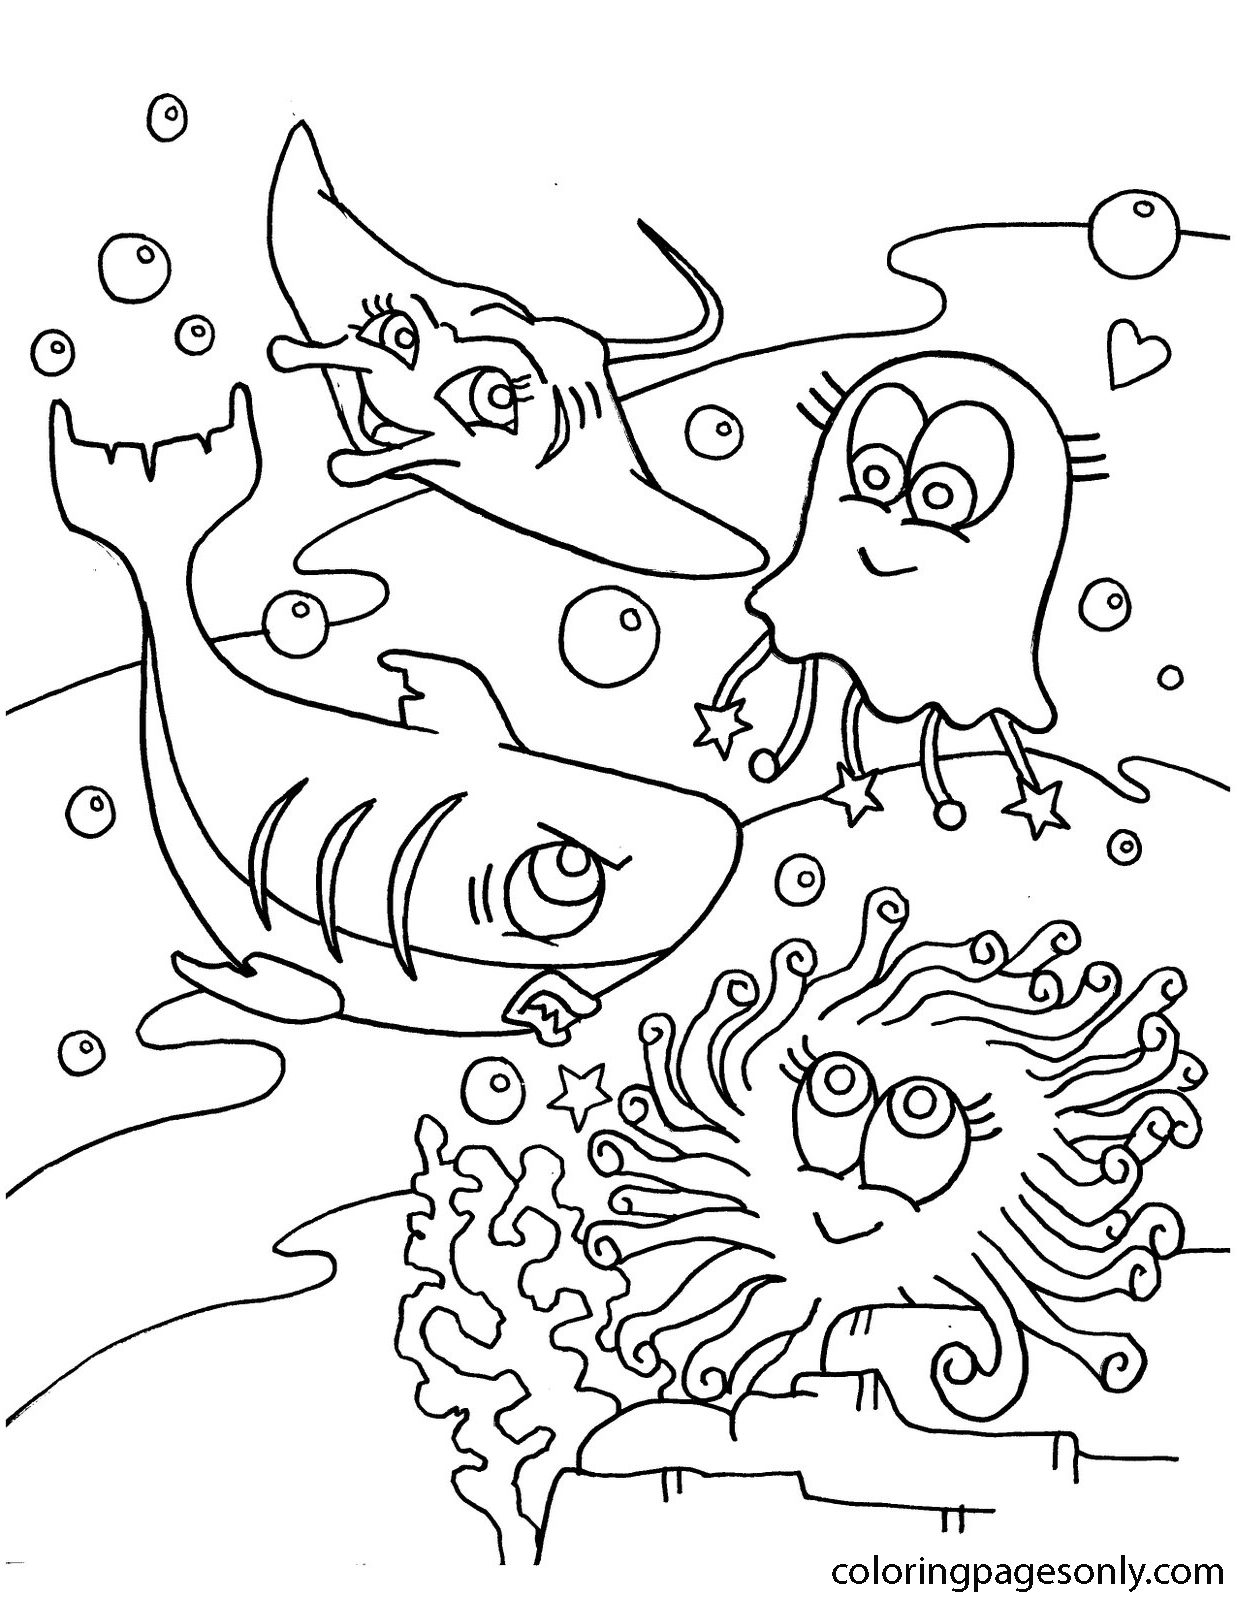 Marines Are Playing Together Under The Sea Coloring Pages